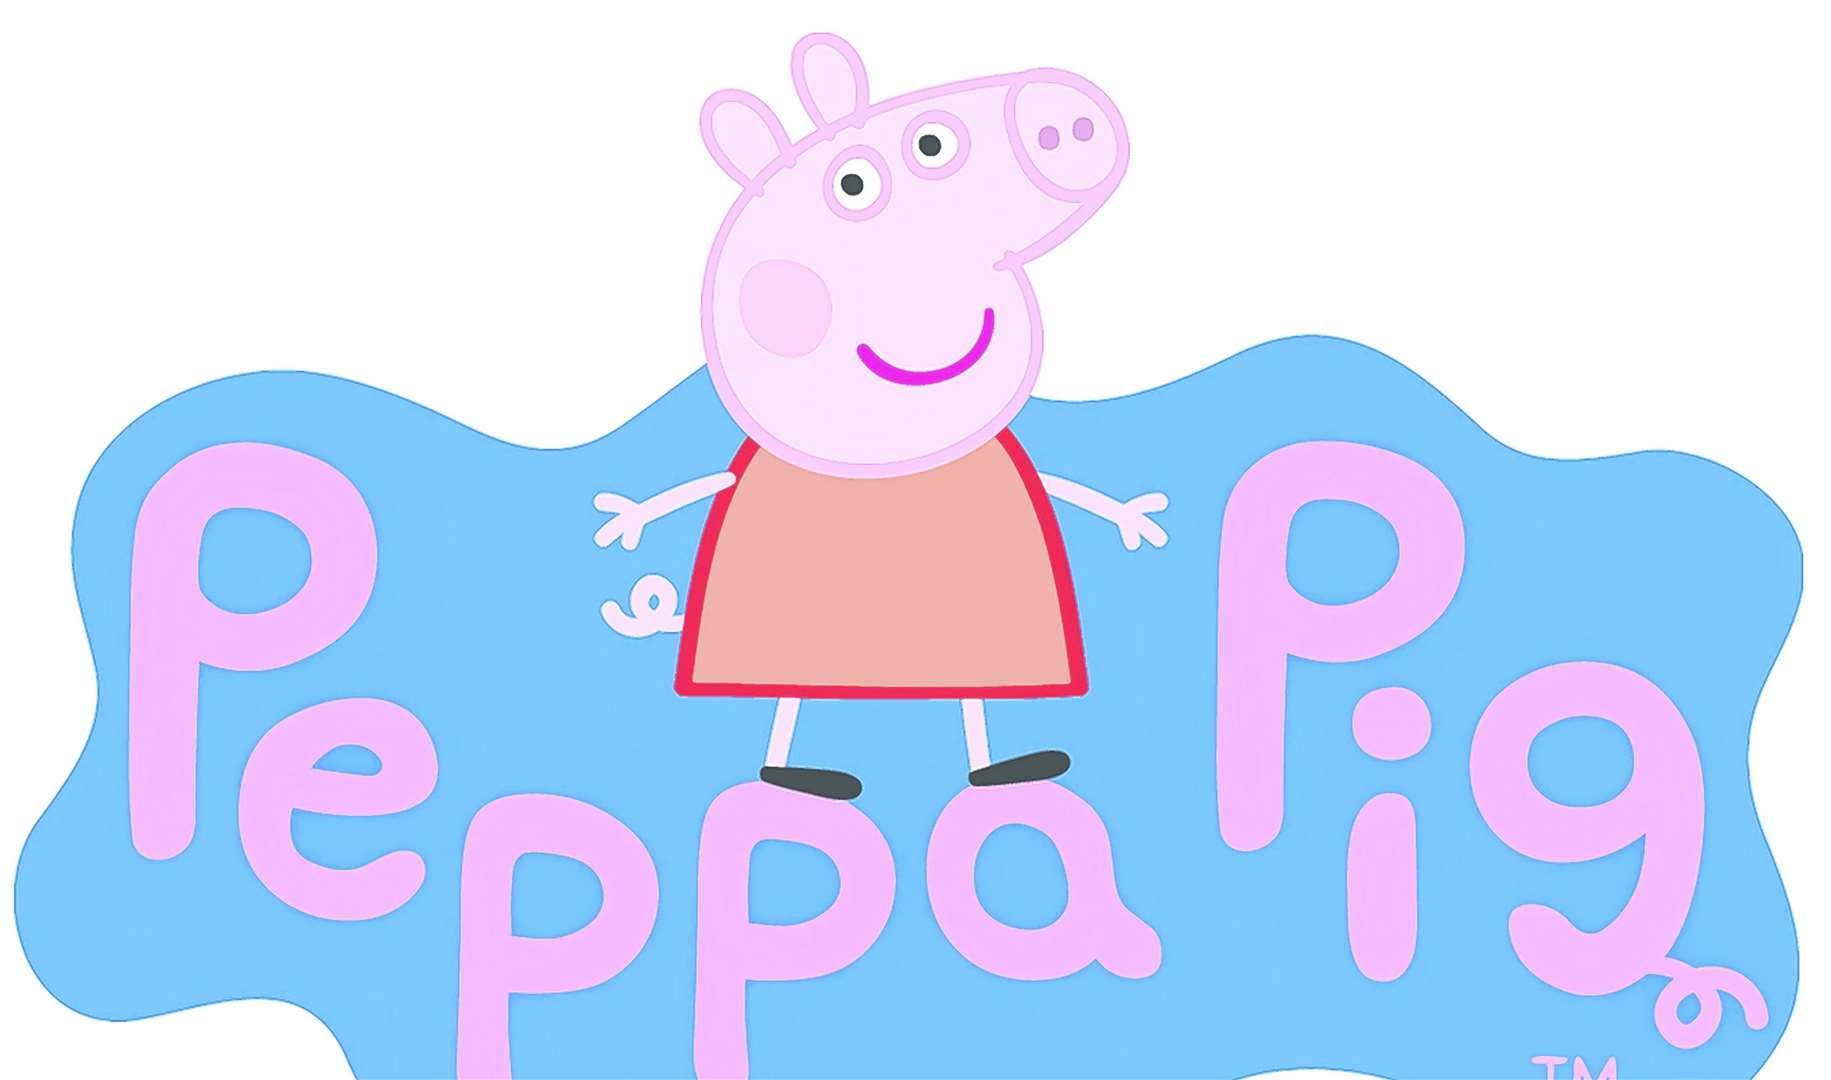 Peppa Pig will be at Groombridge Station